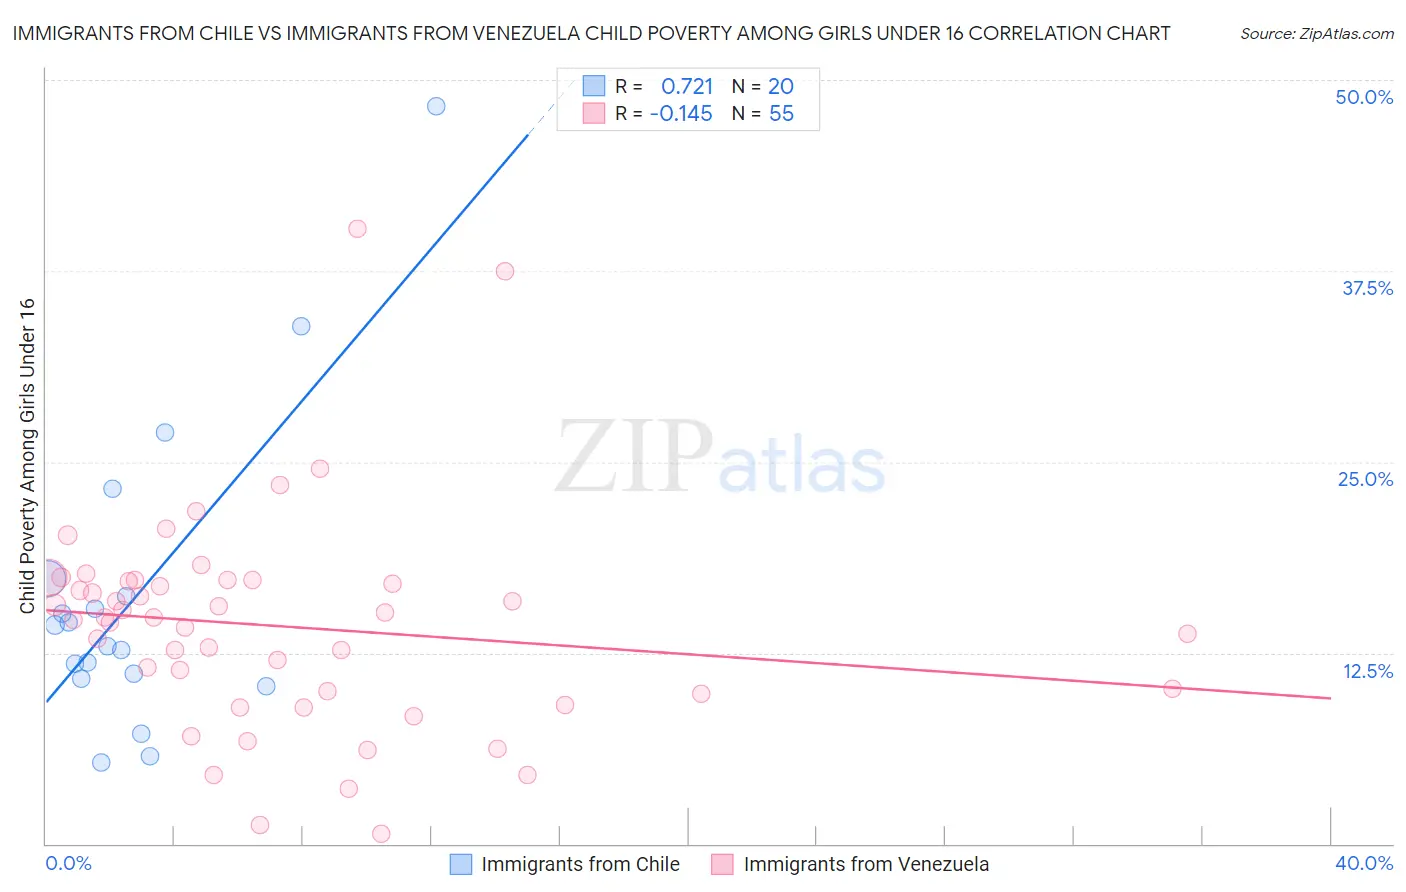 Immigrants from Chile vs Immigrants from Venezuela Child Poverty Among Girls Under 16